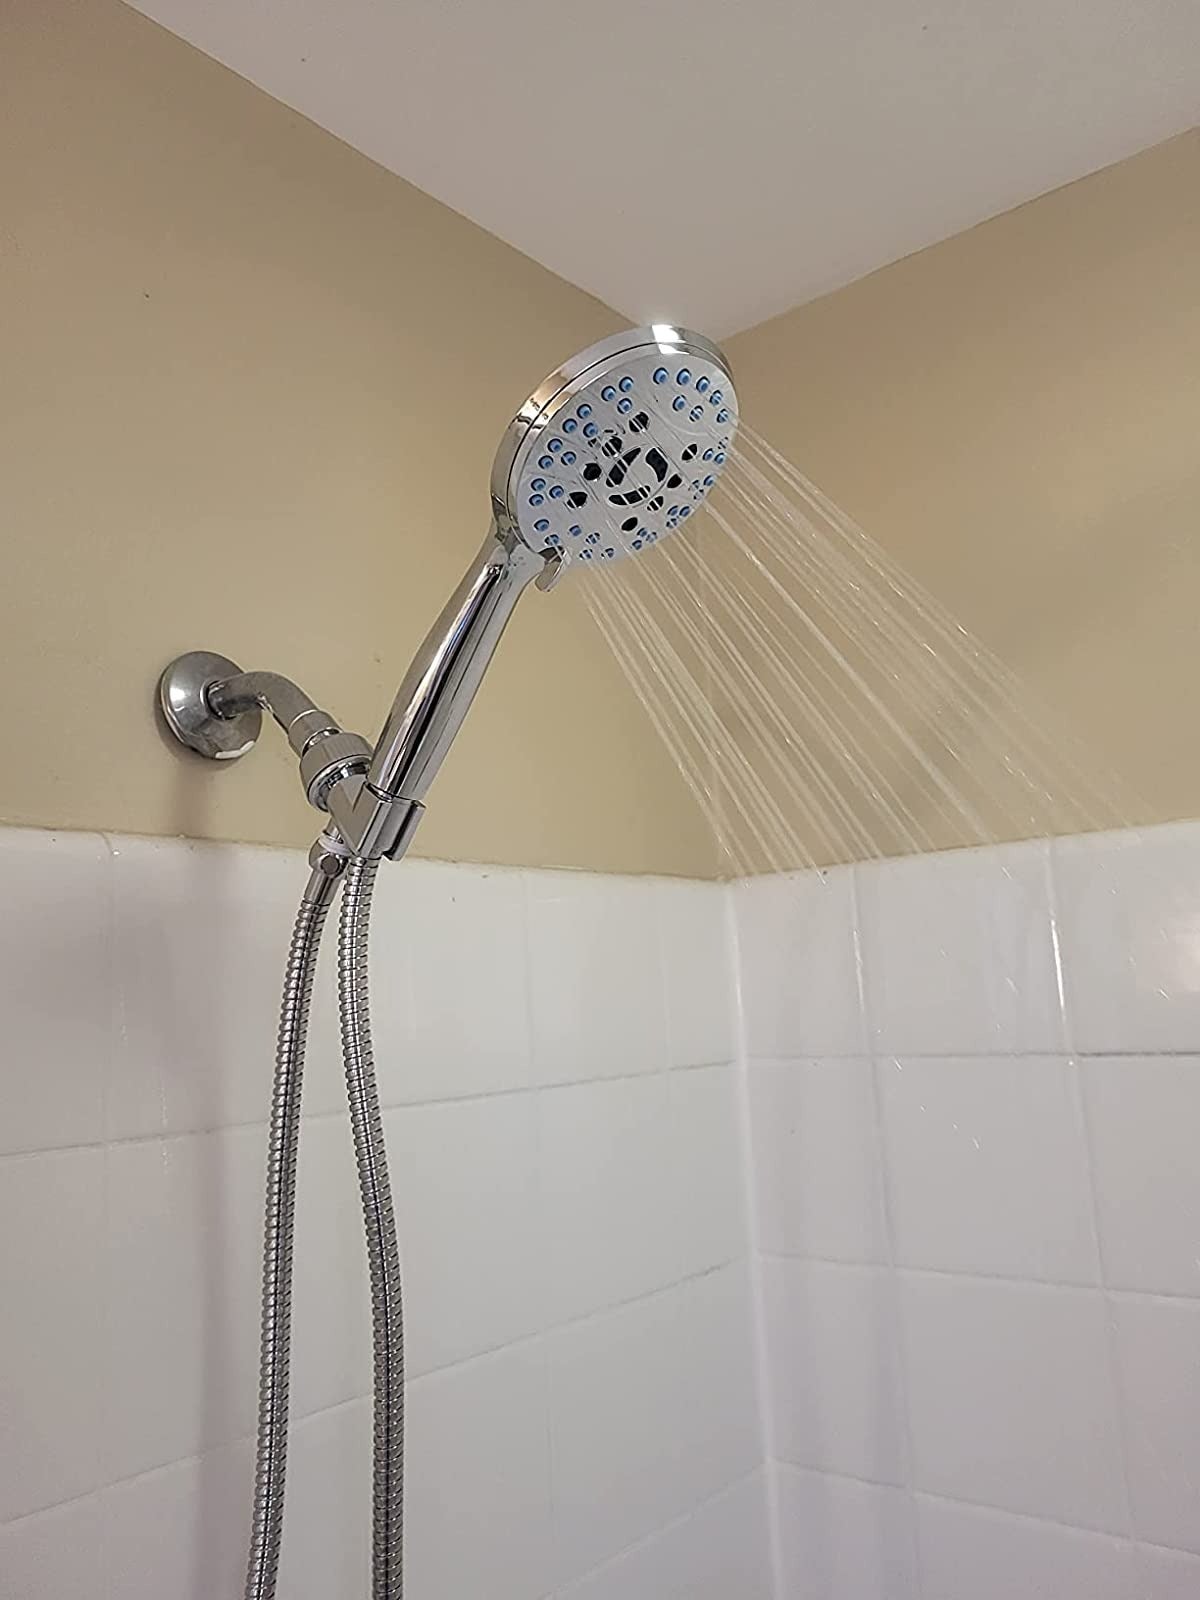 reviewer image of the shower head installed in a shower, streaming water